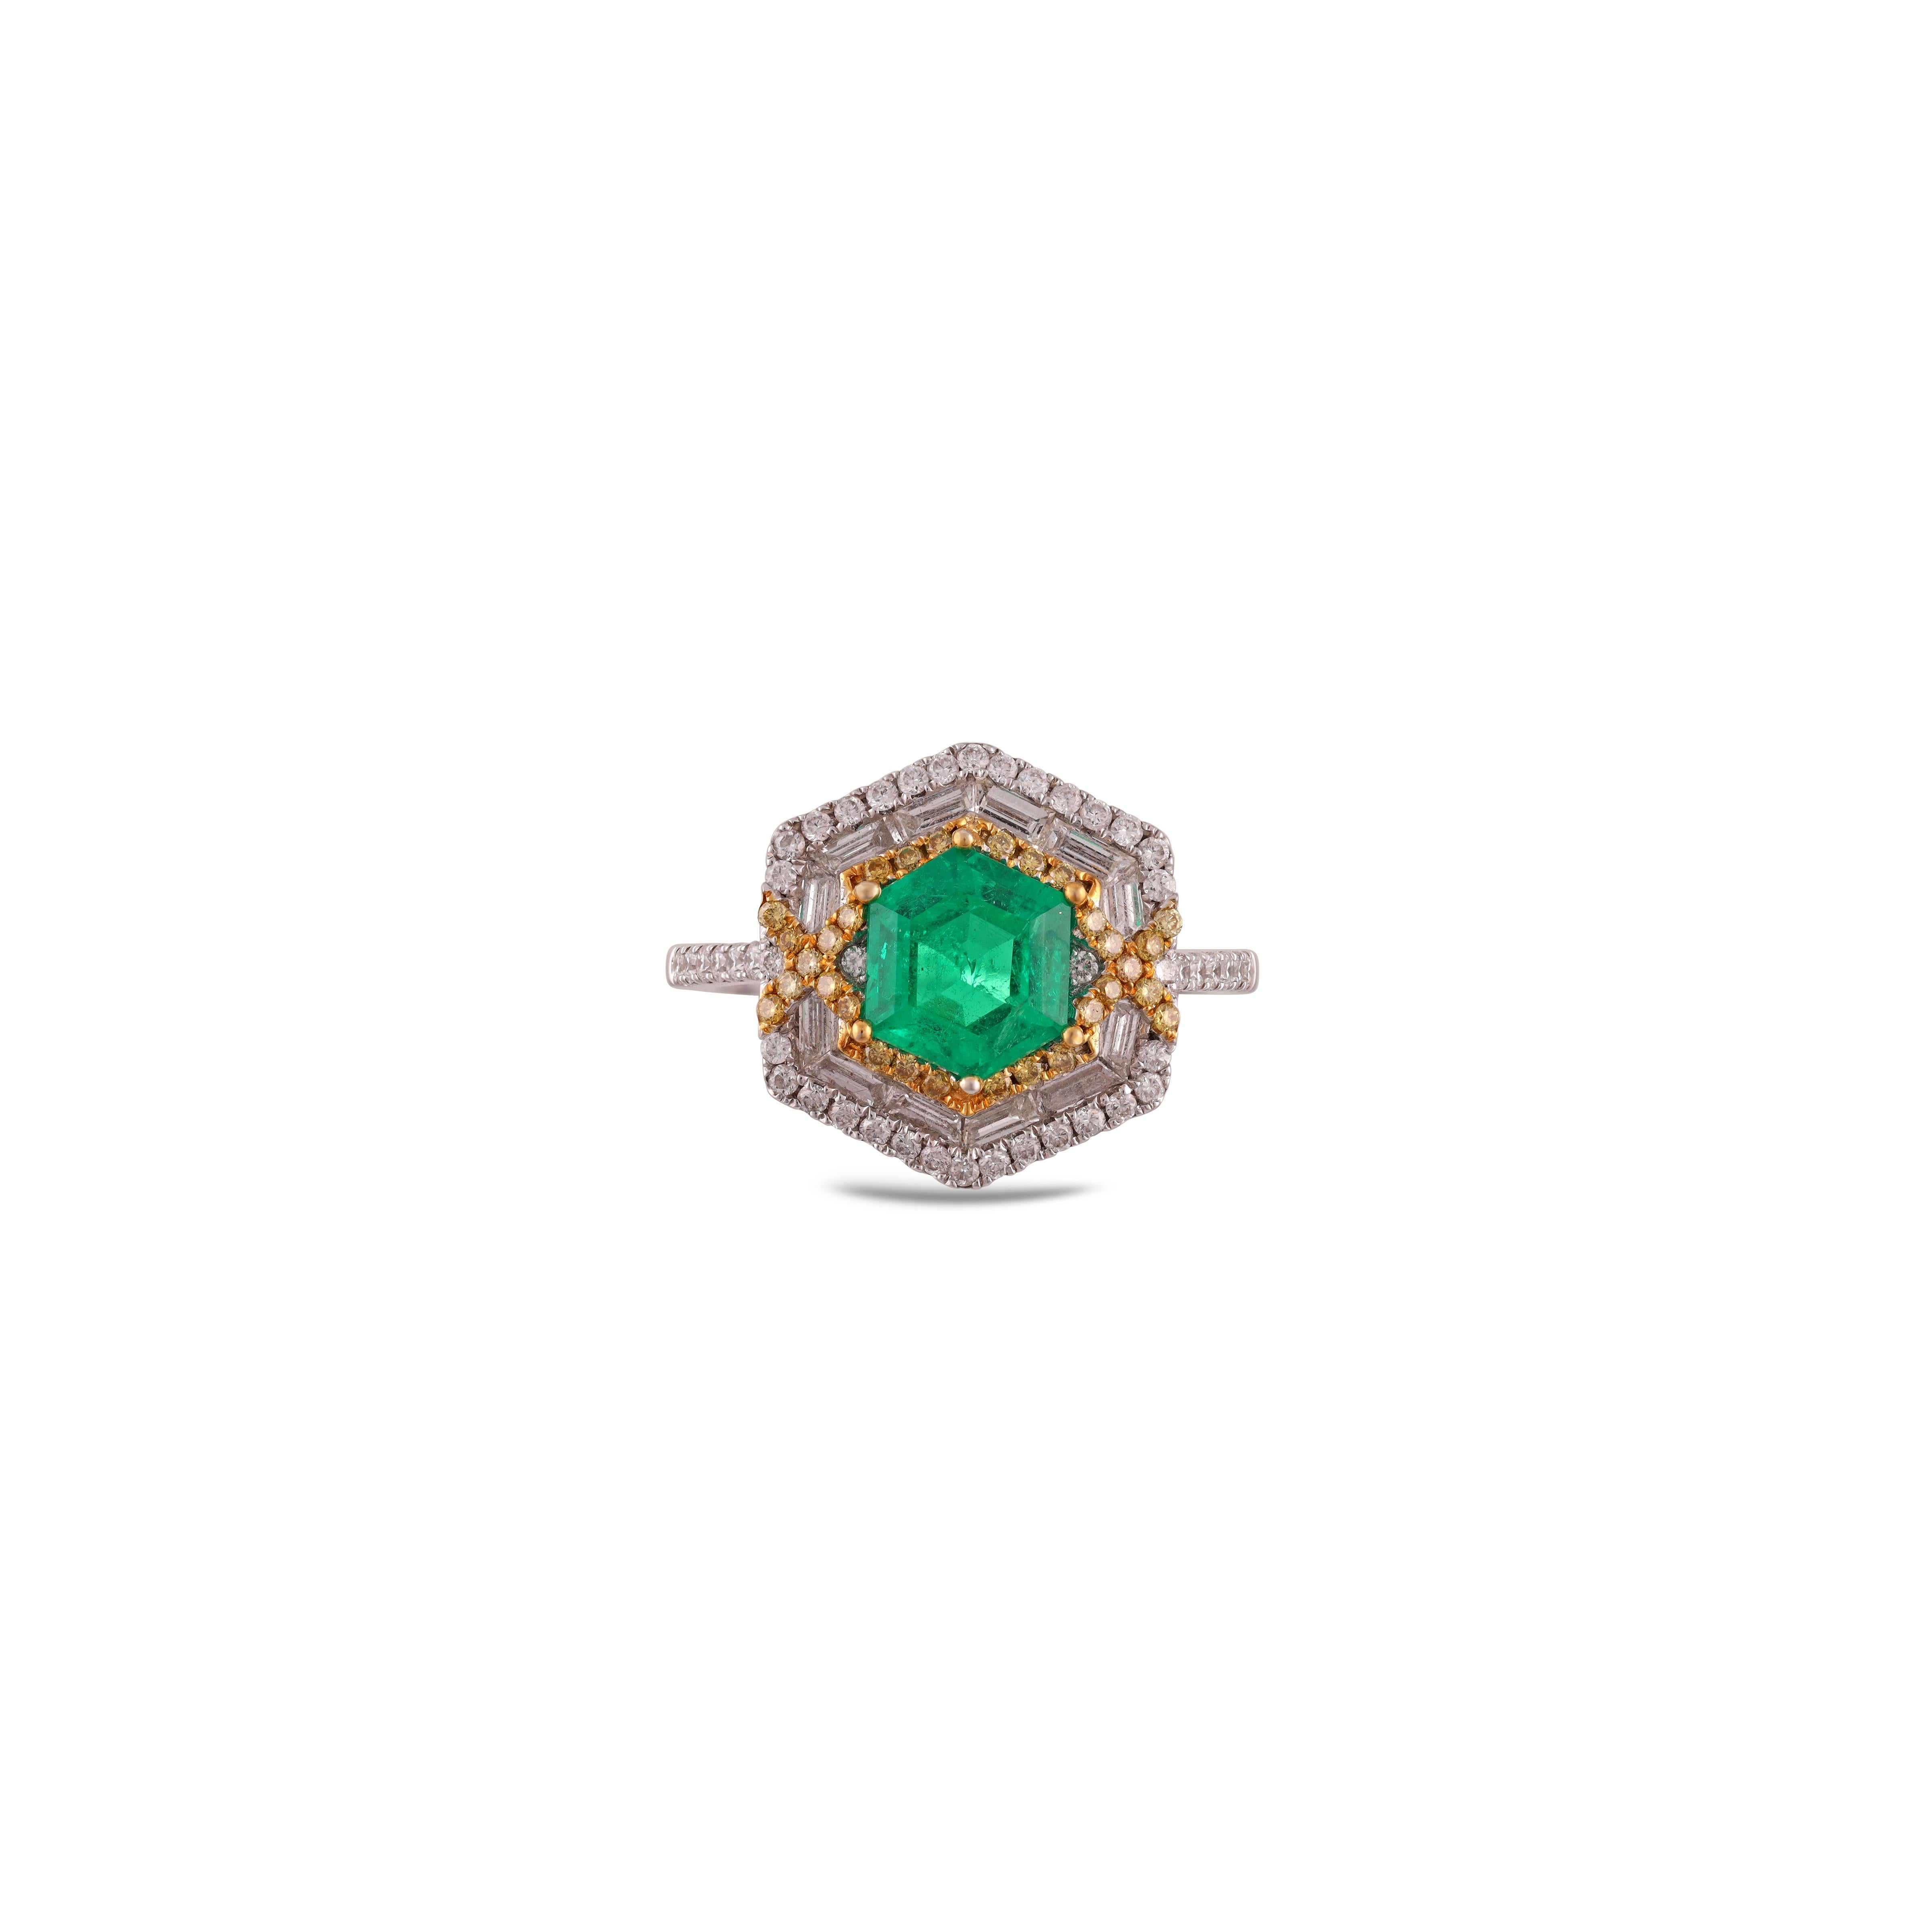 This is an elegant emerald & Fancy diamond ring studded in 18k gold with 1 piece of  Zambian emerald weight 1.47 carat which is surrounded by 90 pieces of diamonds weight 0.97 carat, this entire ring studded in 18k  gold.



 Ring size can be change